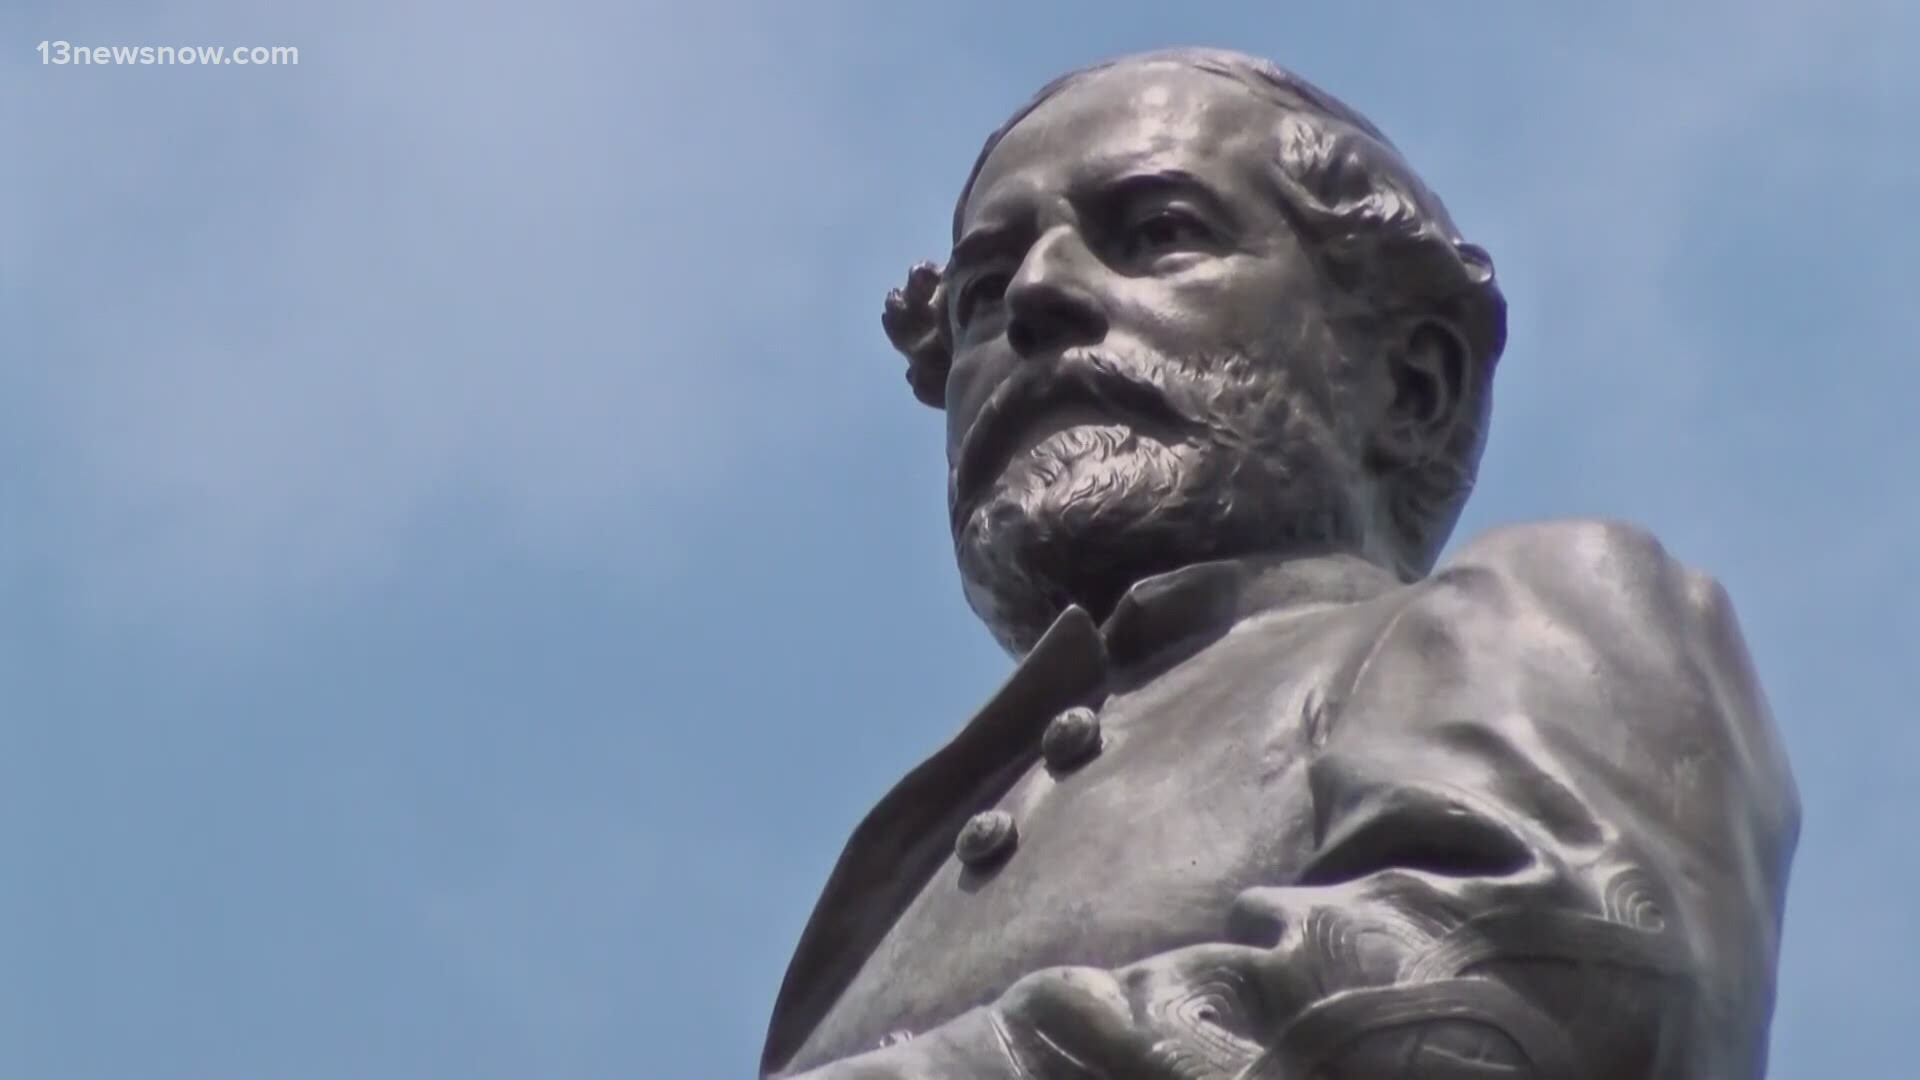 The trial to decide what happens to the Robert E. Lee statue in Richmond is underway. A lawsuit was filed against Northam's order to remove the memorial.